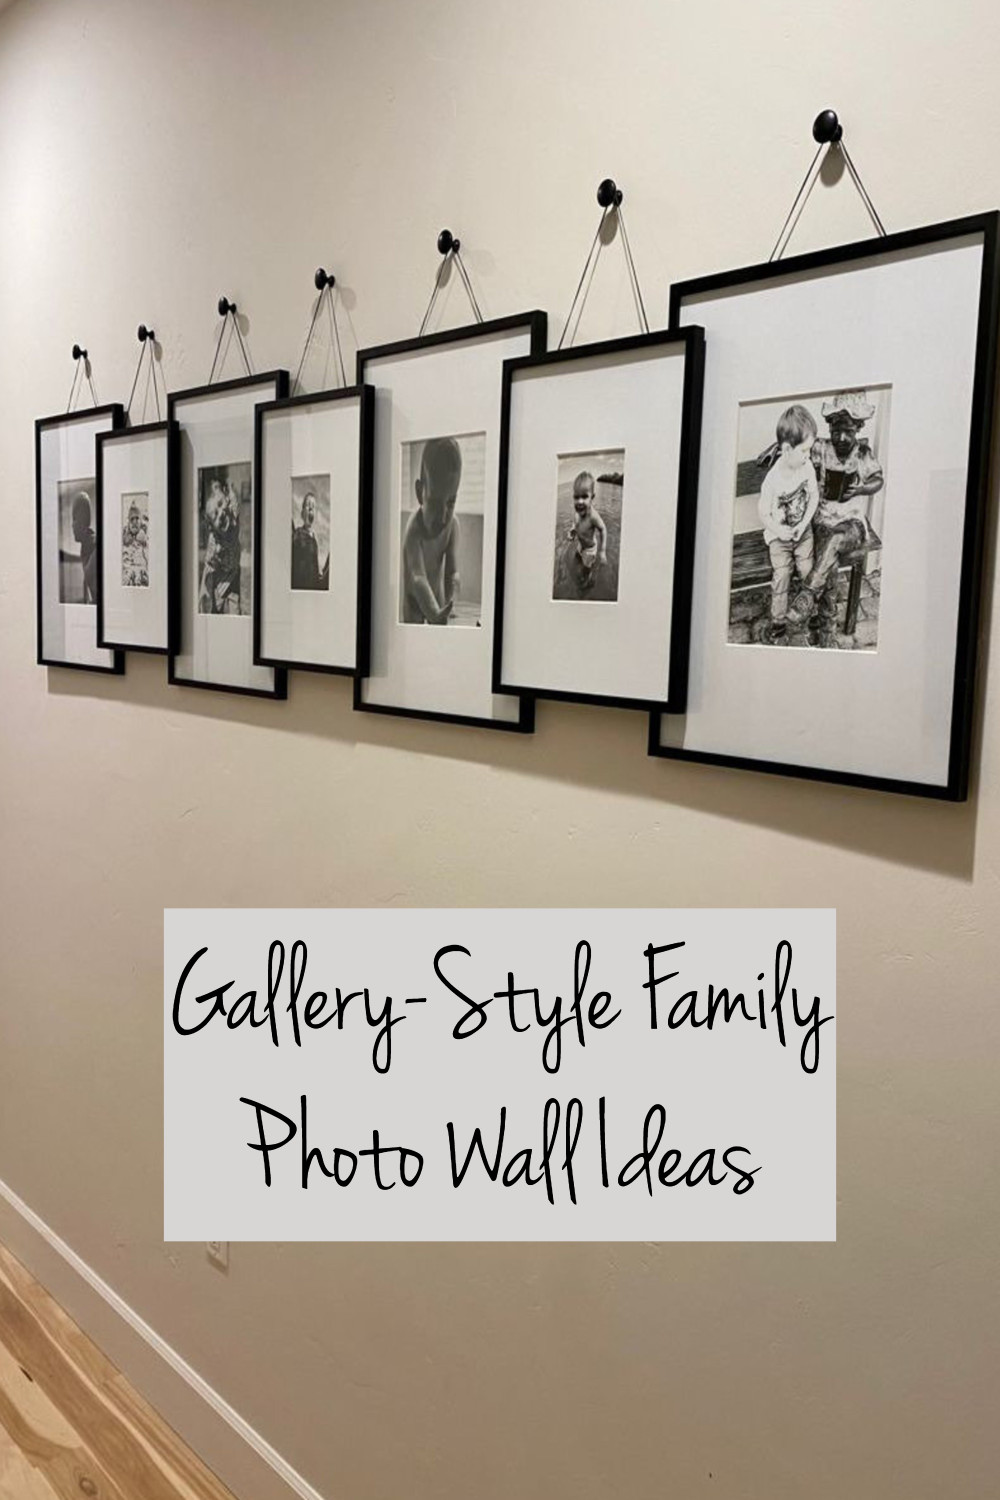 Gallery style family photo wall ideas for narrow hallway foyer or entryway